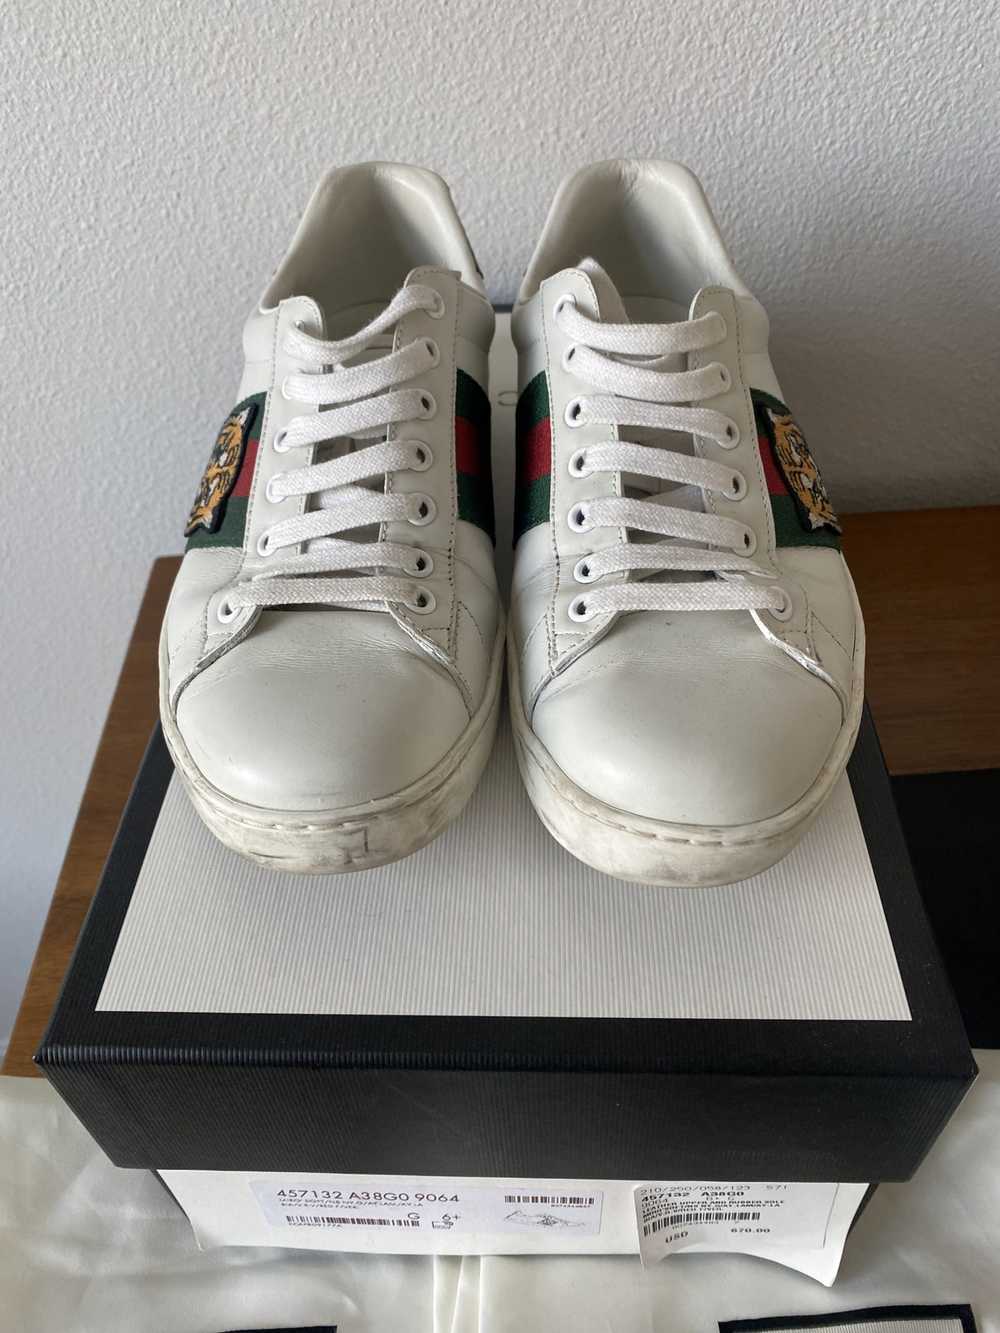 Gucci Gucci Ace Embroidered Tiger Sneakers - image 4